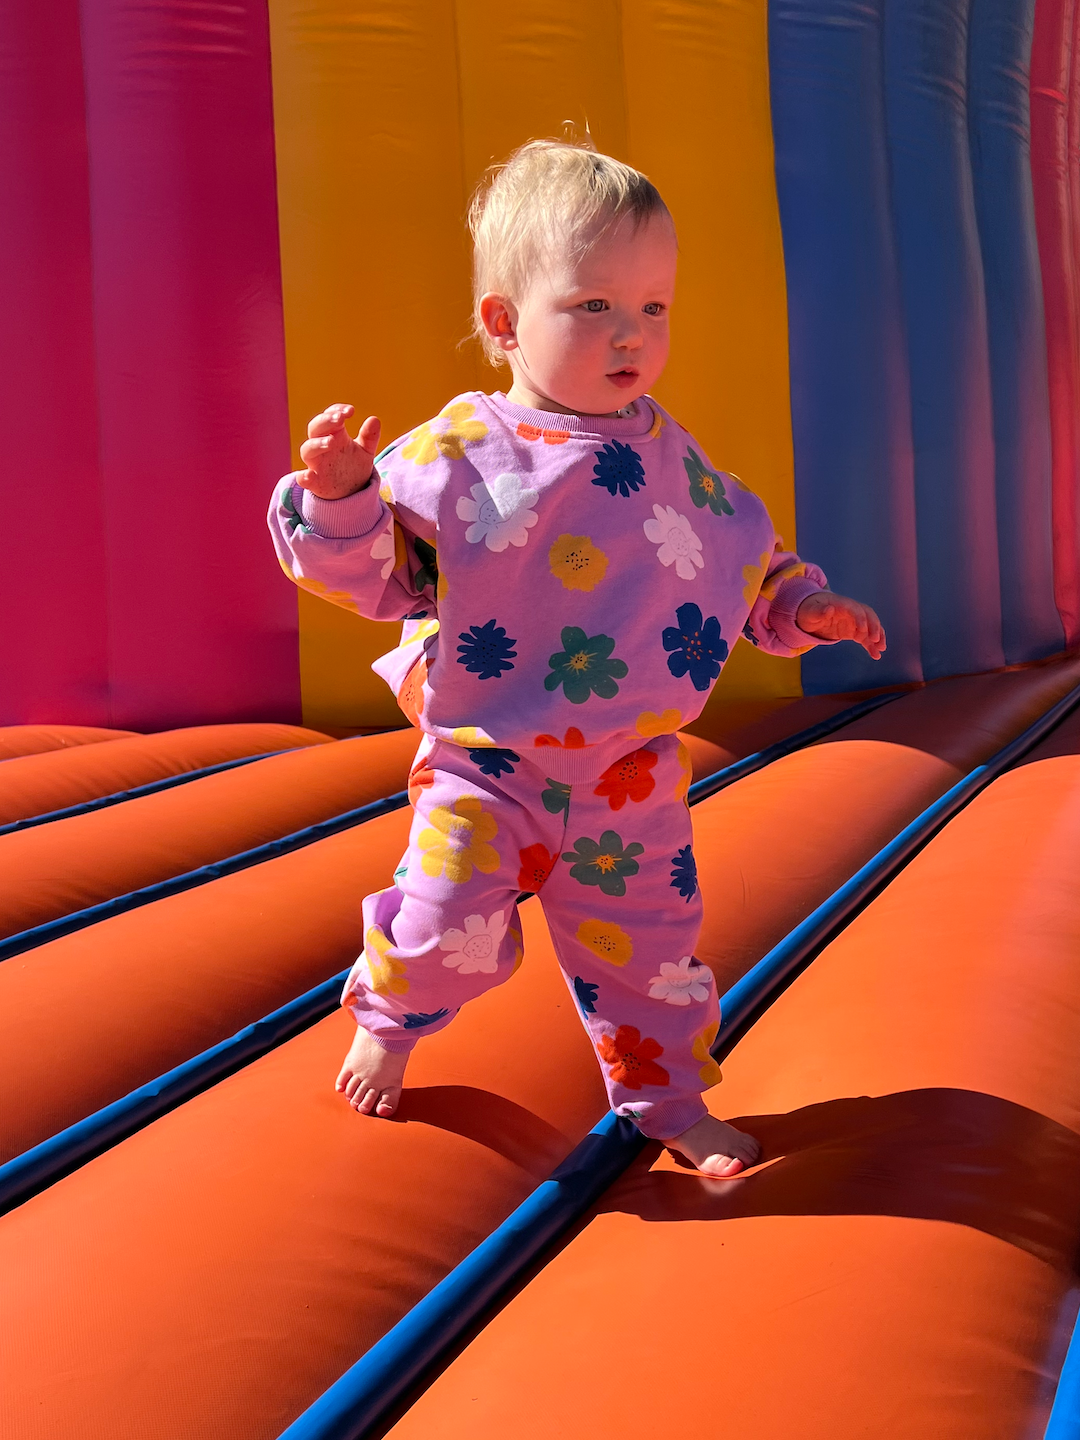 A toddler on a bouncy castle wearing a kids' sweatshirt and pants in purple, printed with yellow, orange, green, blue and white flowers